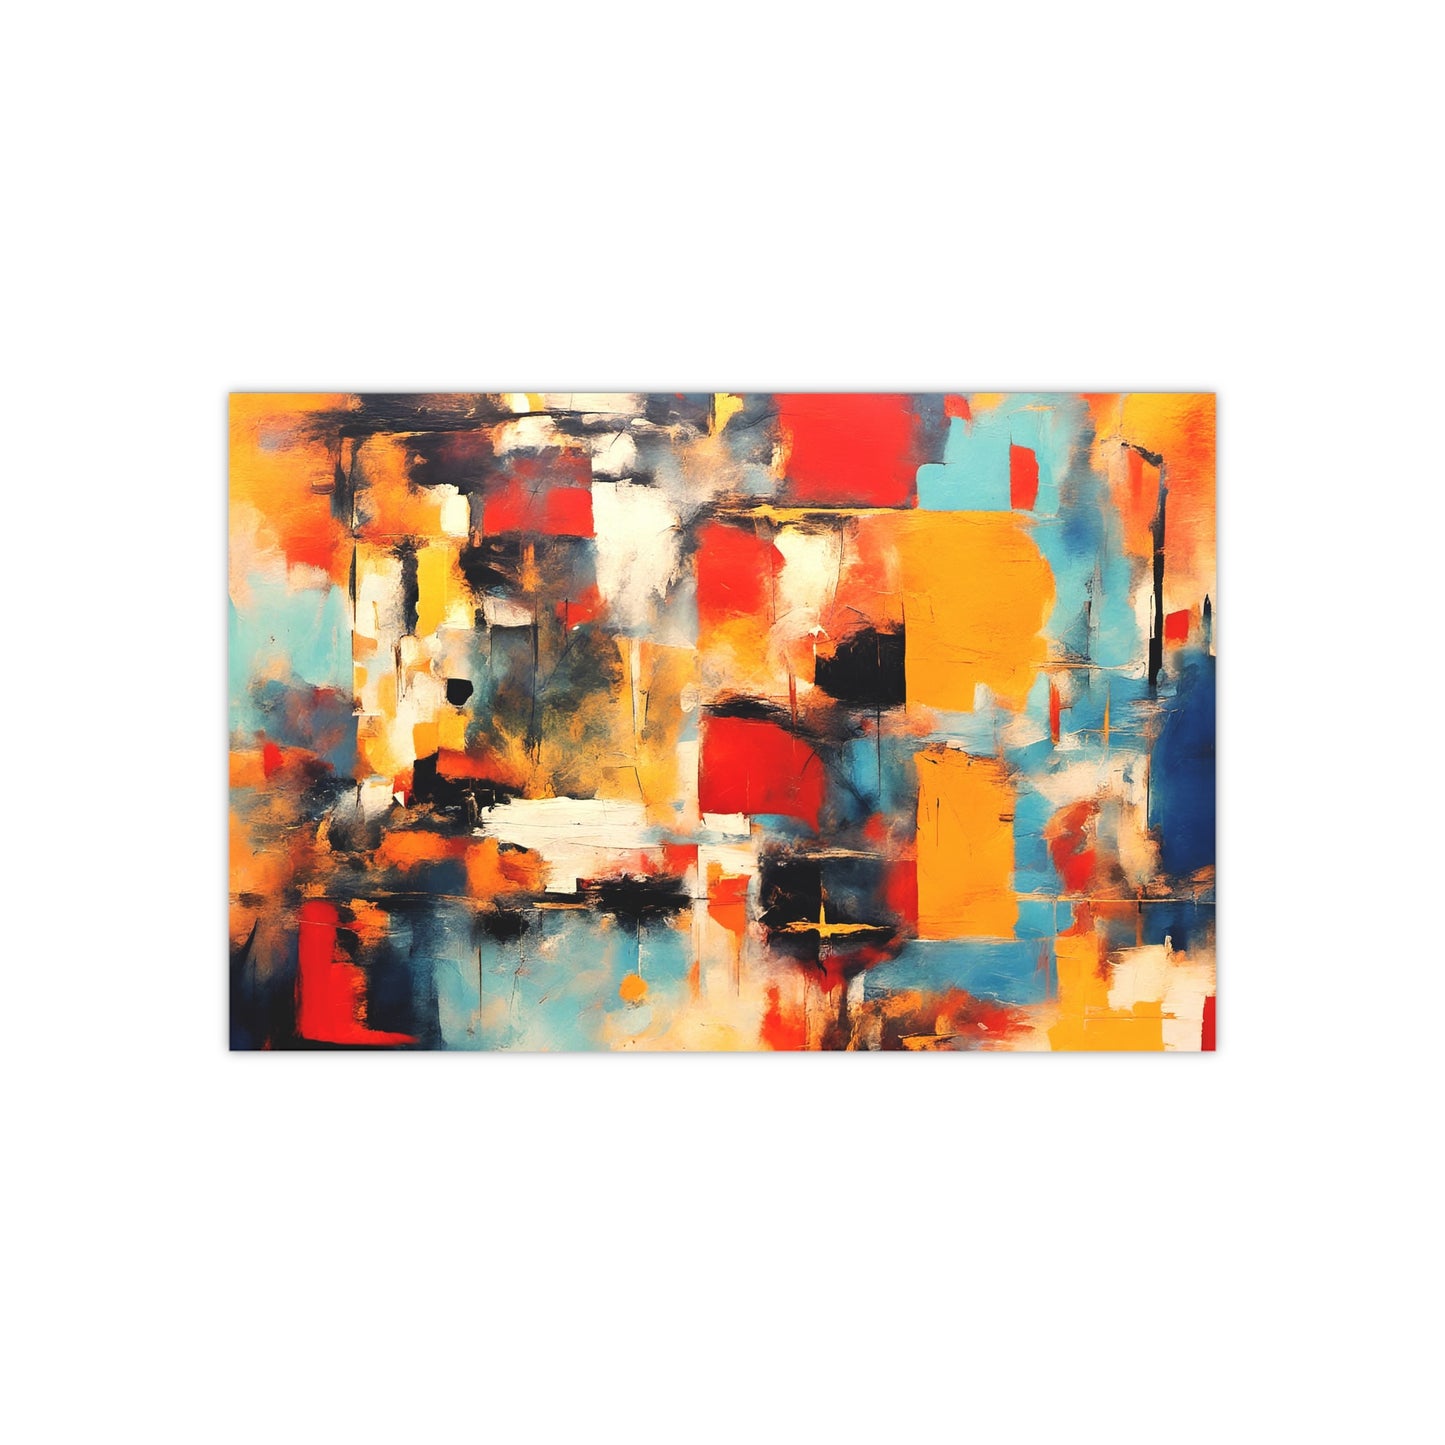 Modern Art Wall Print - Reflection of Multicolor Patches on Museum-Quality Archival Paper